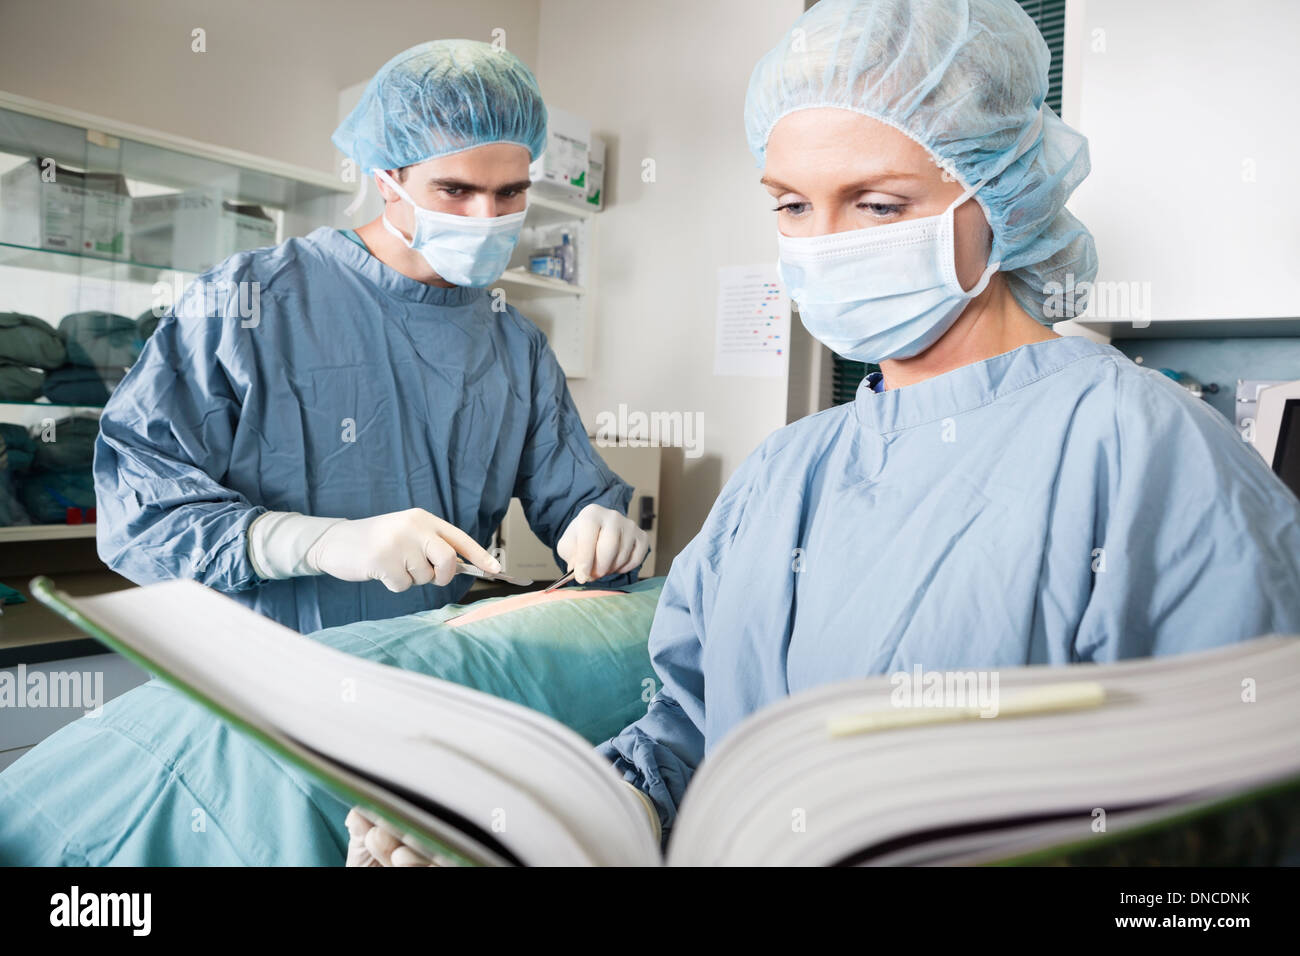 Veterinarian Doctor And Female Assistant In Surgical Theatre Stock Photo